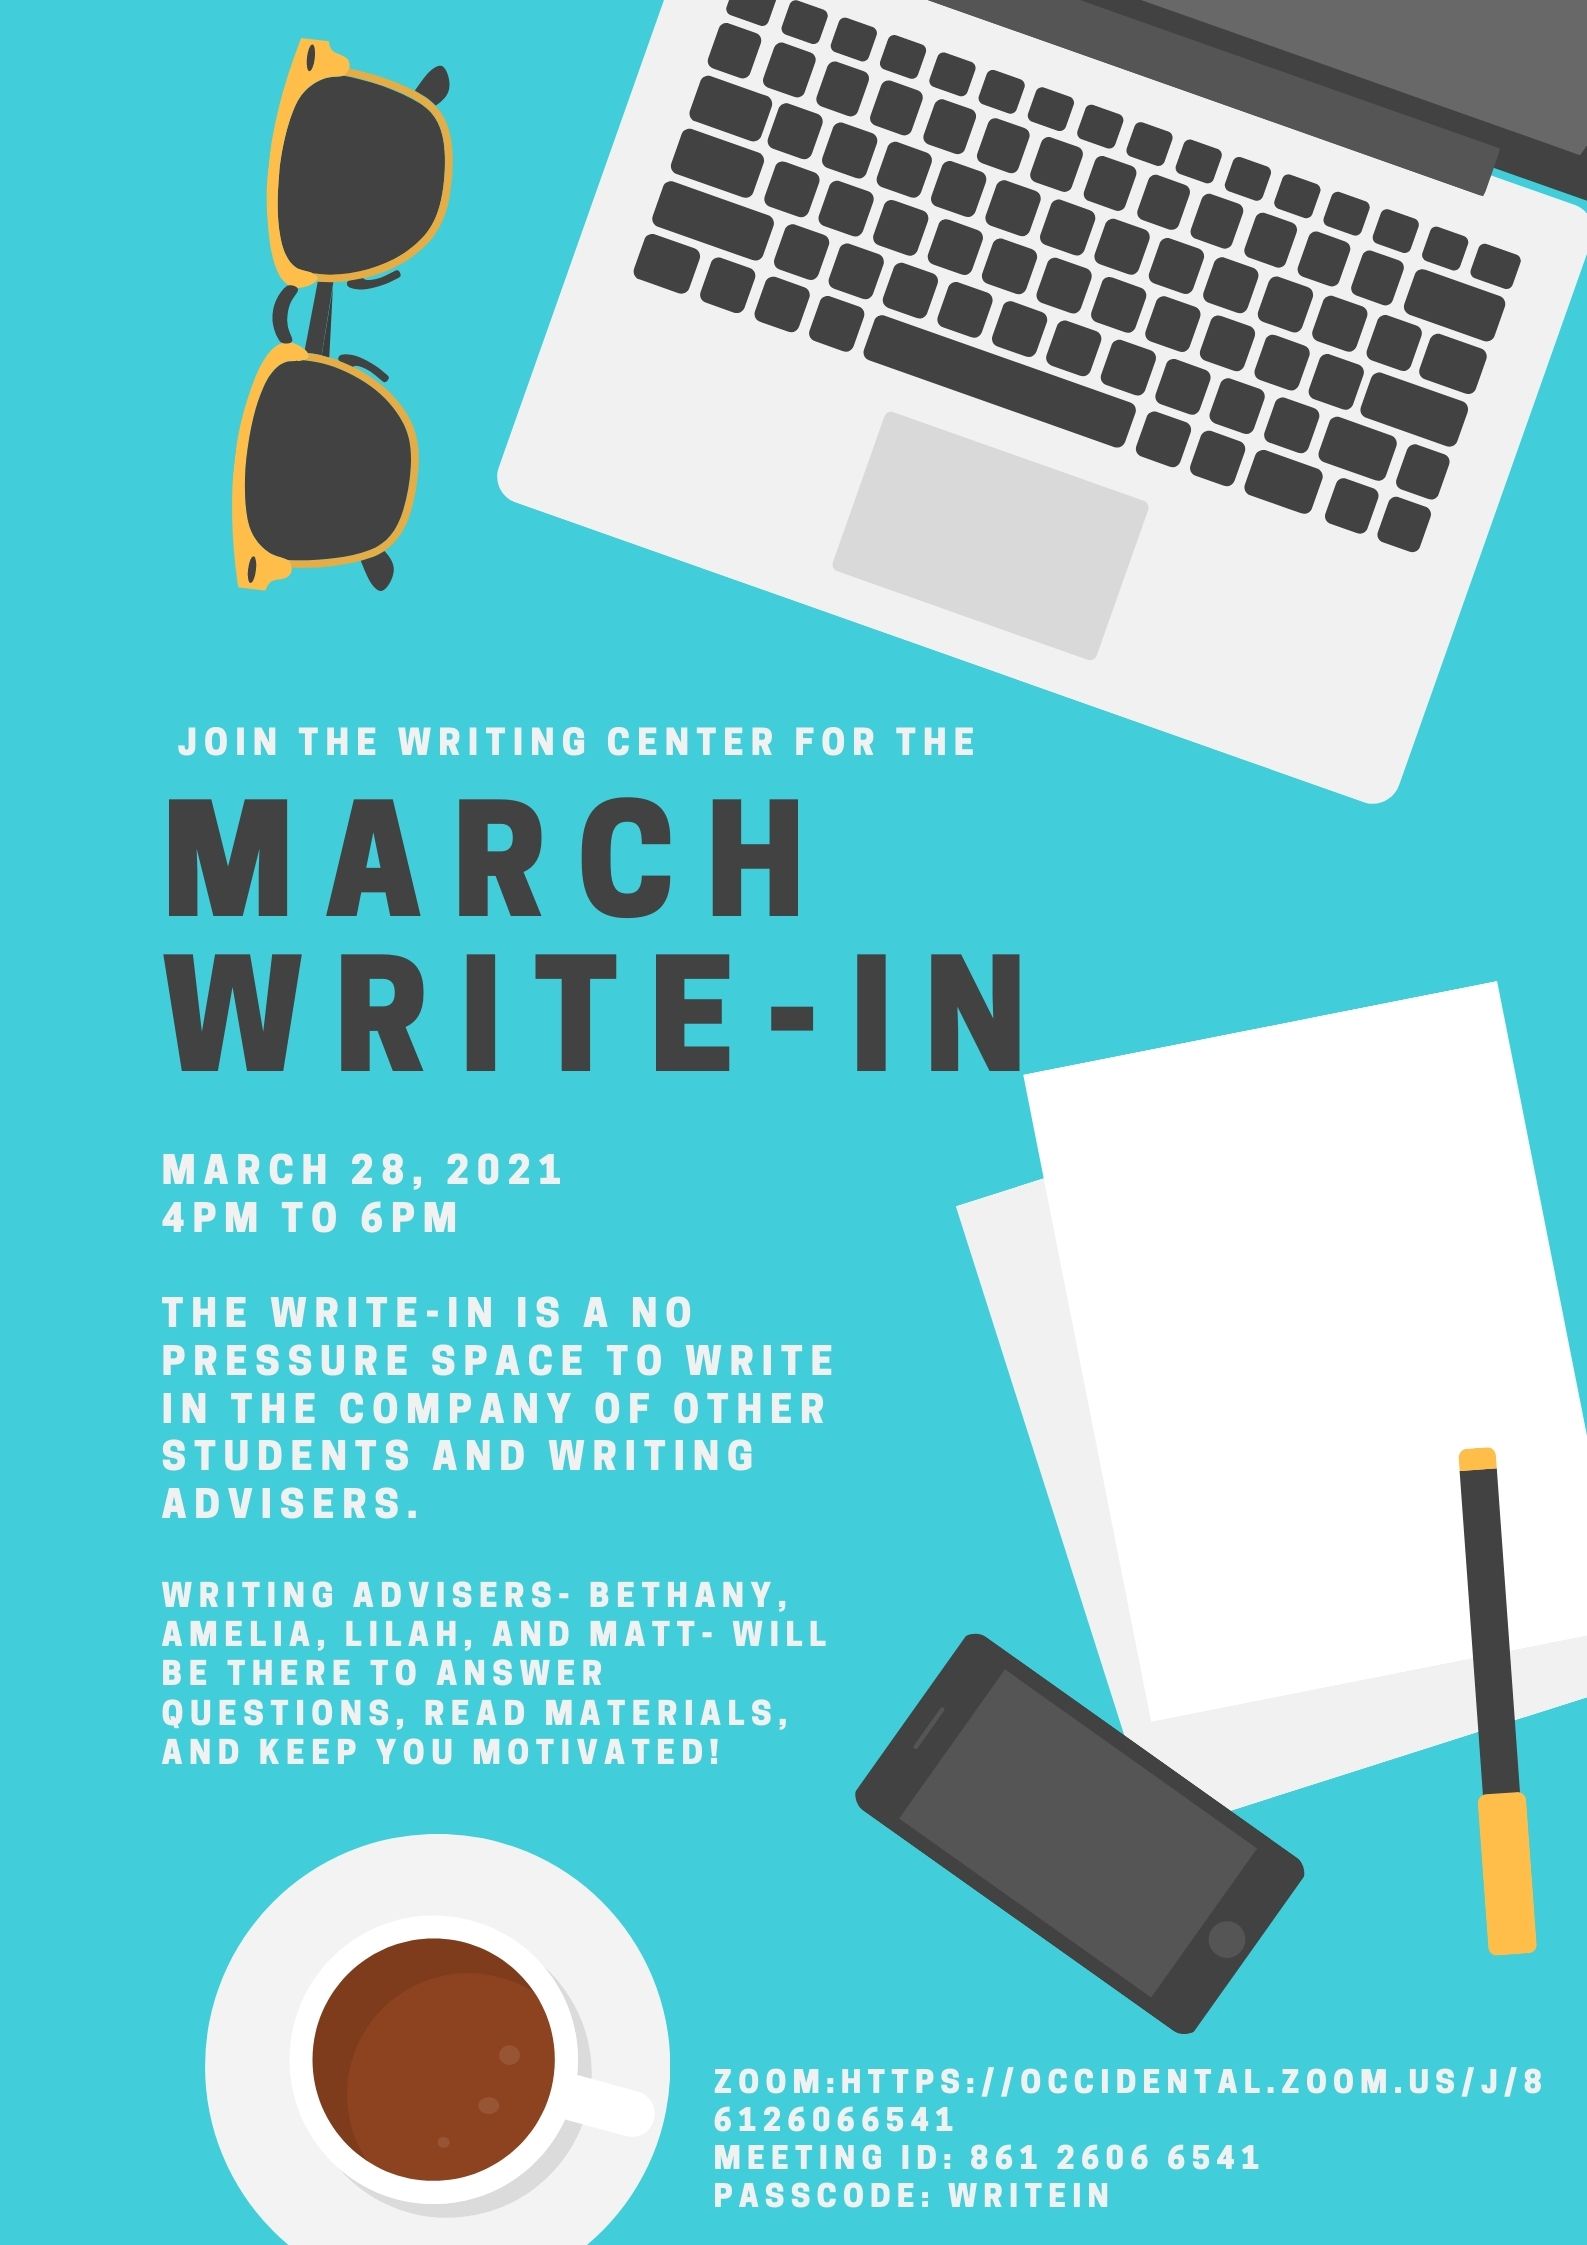 A blue flyer describing the March Write-In event with graphics depicting sunglasses, a laptop, loose blank paper, a pen, a cell phone and a cup of coffee. Text reads "Join the Writing Center for the March Write-In. March 28, 2021 4PM-6PM"